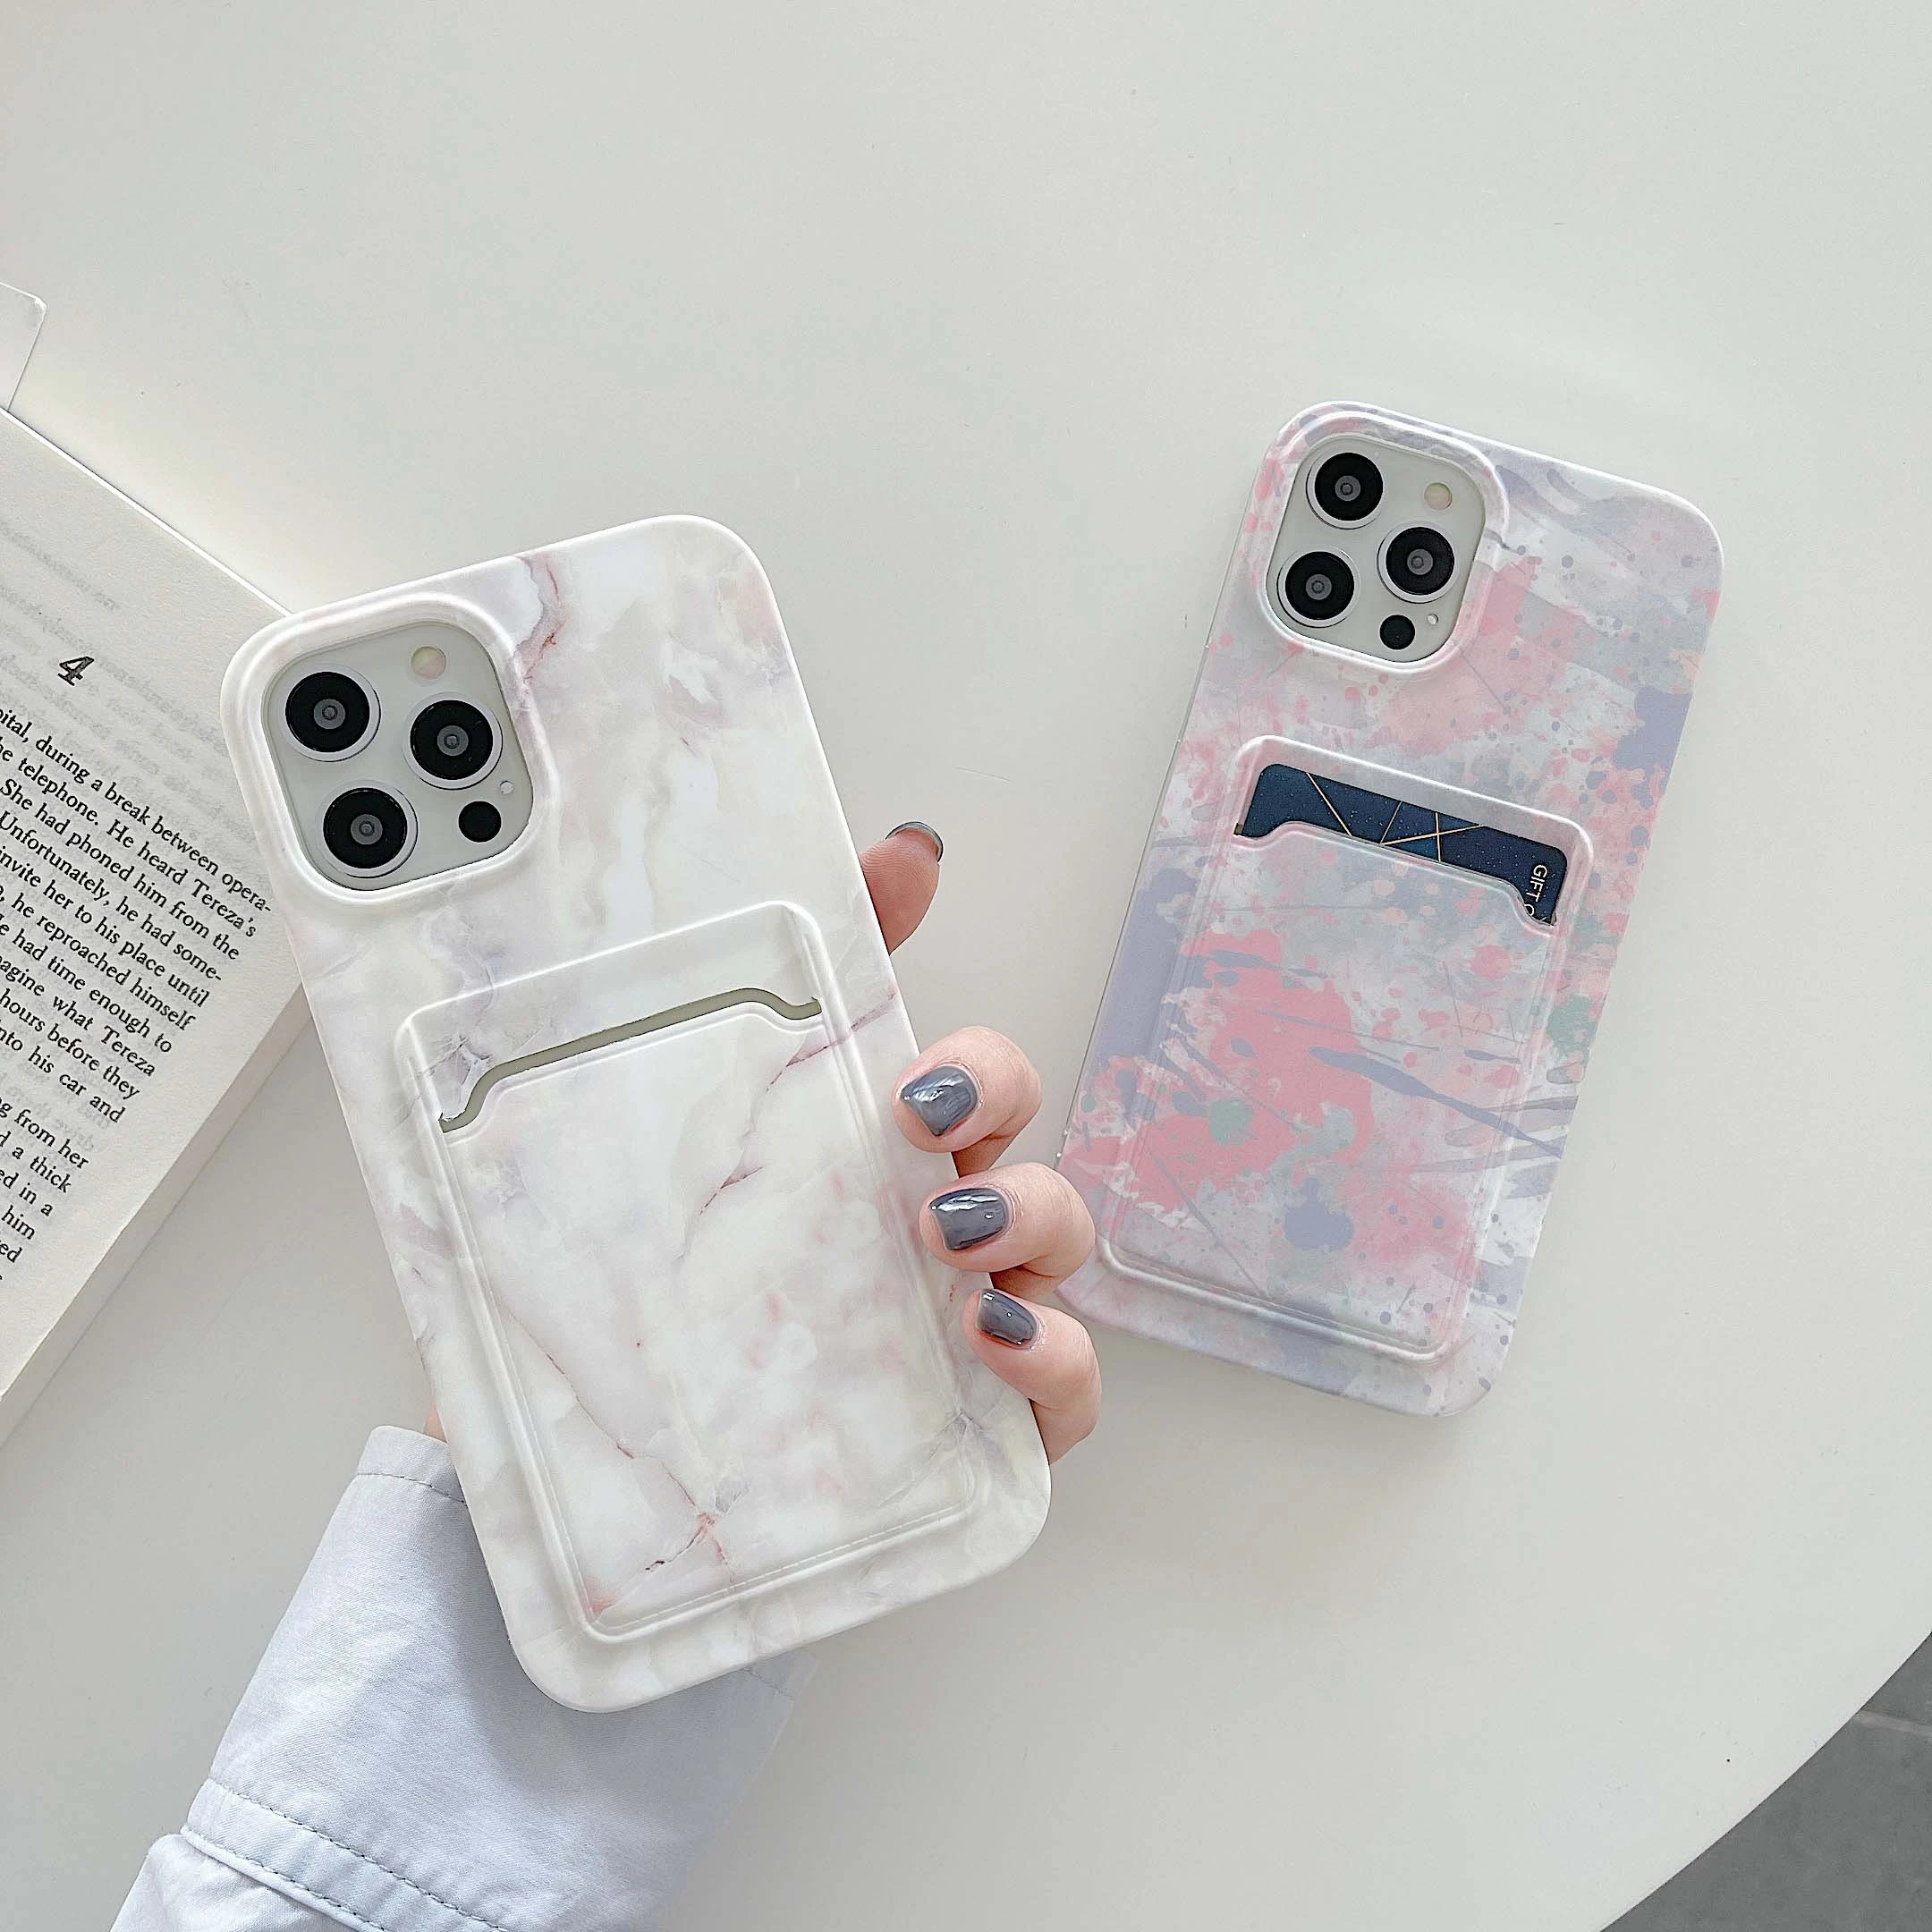 Fashion Colorful Marble Card Pouch Phone Cases for iPhone 12 13 11 Pro Max X XR XS- Max XS 7 8 Plus Shockproof Back Cover Couque iphone 11 Pro Max wallet case